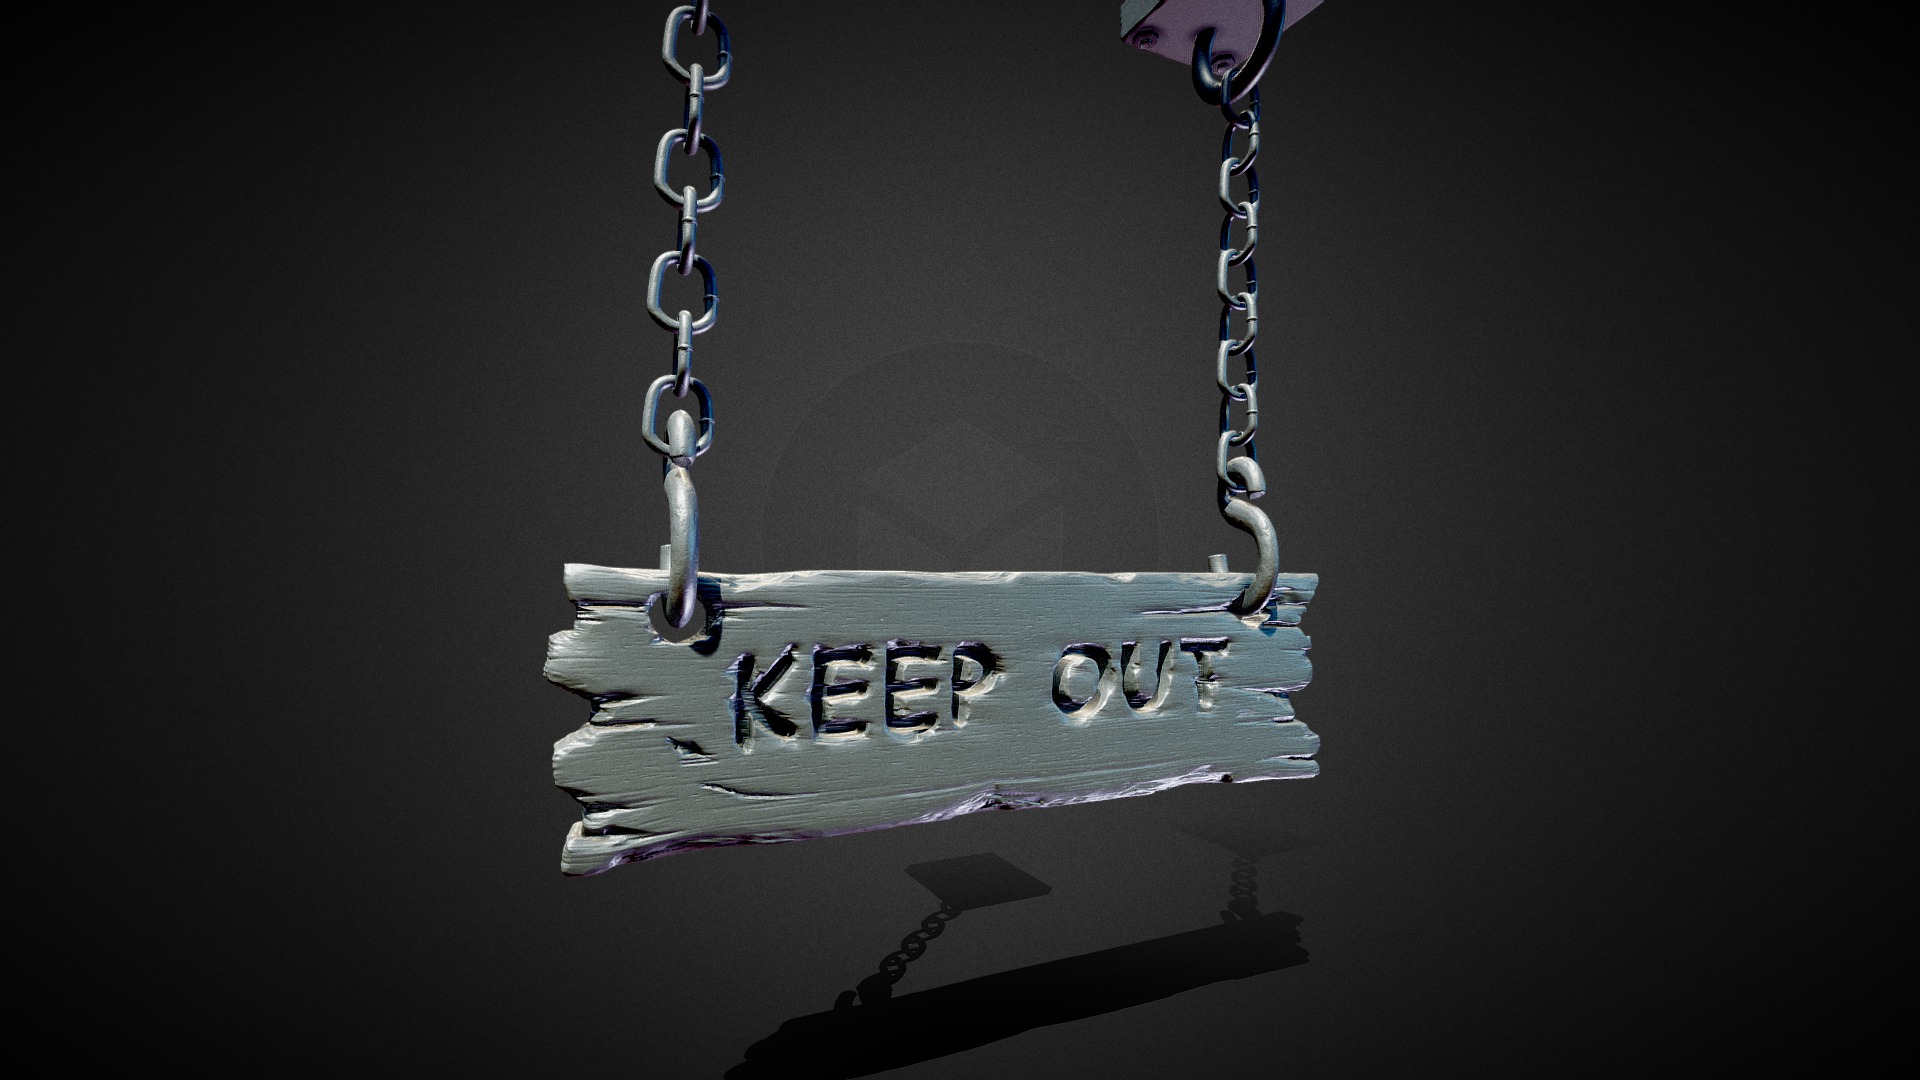 3D model 3D "Keep Out" Wooden Sign – High Poly - This is a 3D model of the 3D "Keep Out" Wooden Sign - High Poly. The 3D model is about a necklace with a pendant.